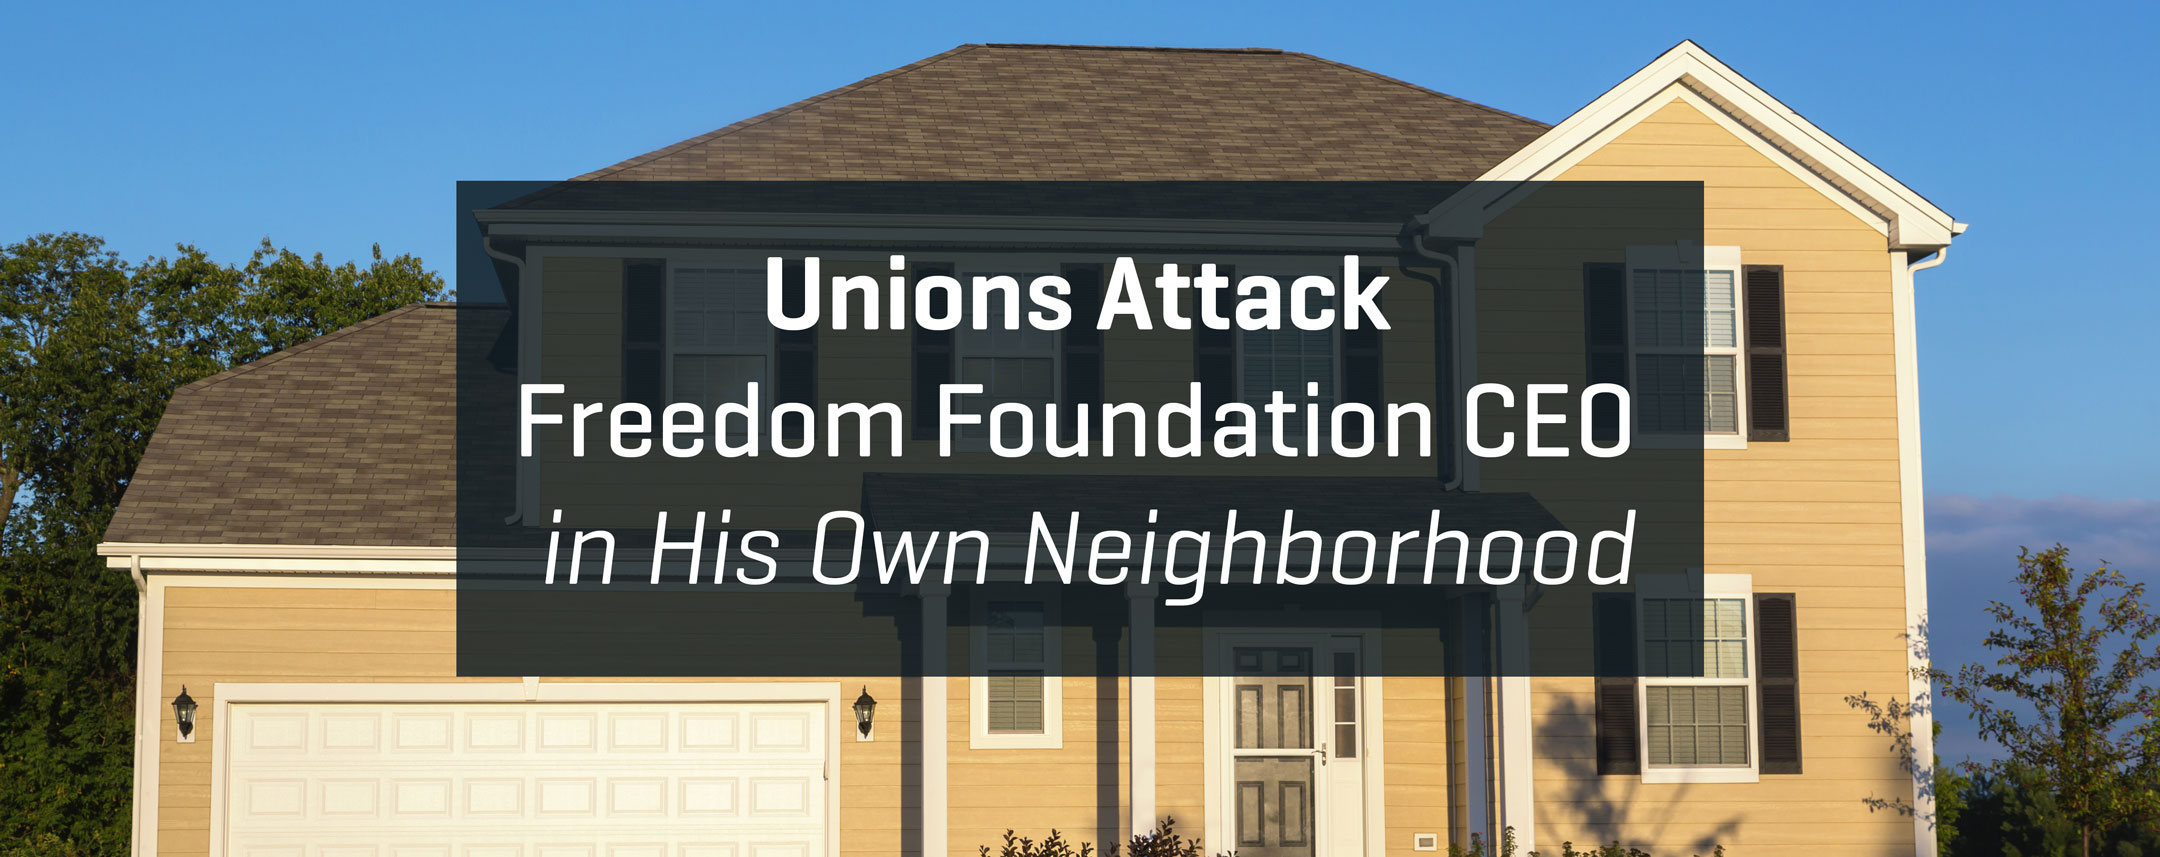 unions-attack-featured.jpg